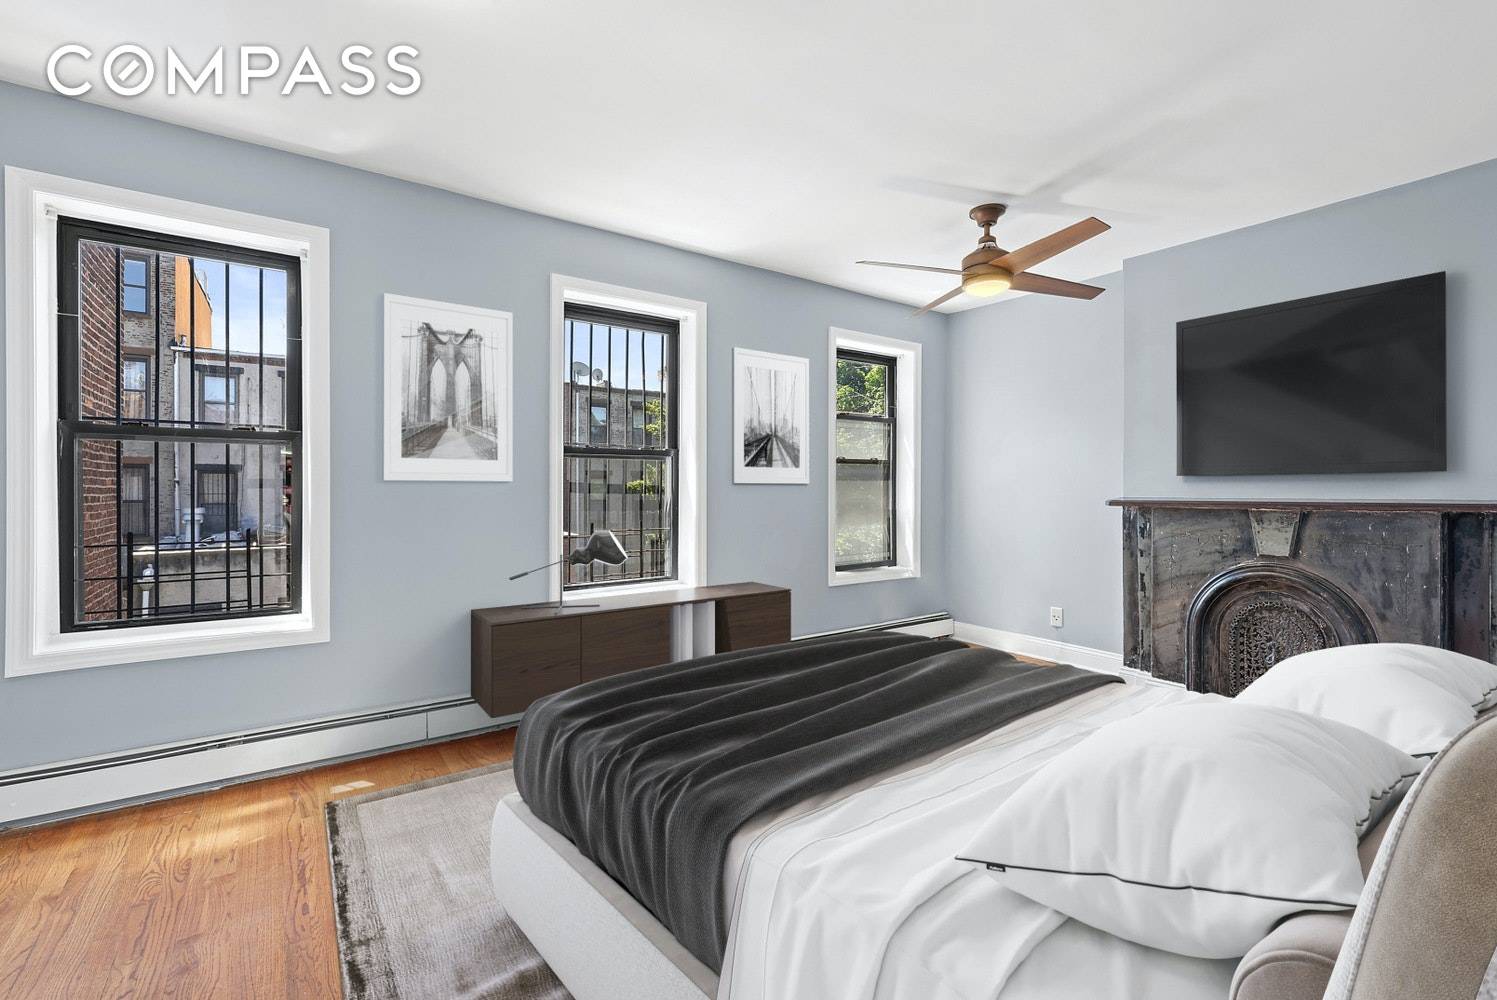 This magnificent 4 bed, 3 full bath Brownstone upper duplex in Bed Stuy is a unique and enviable find.